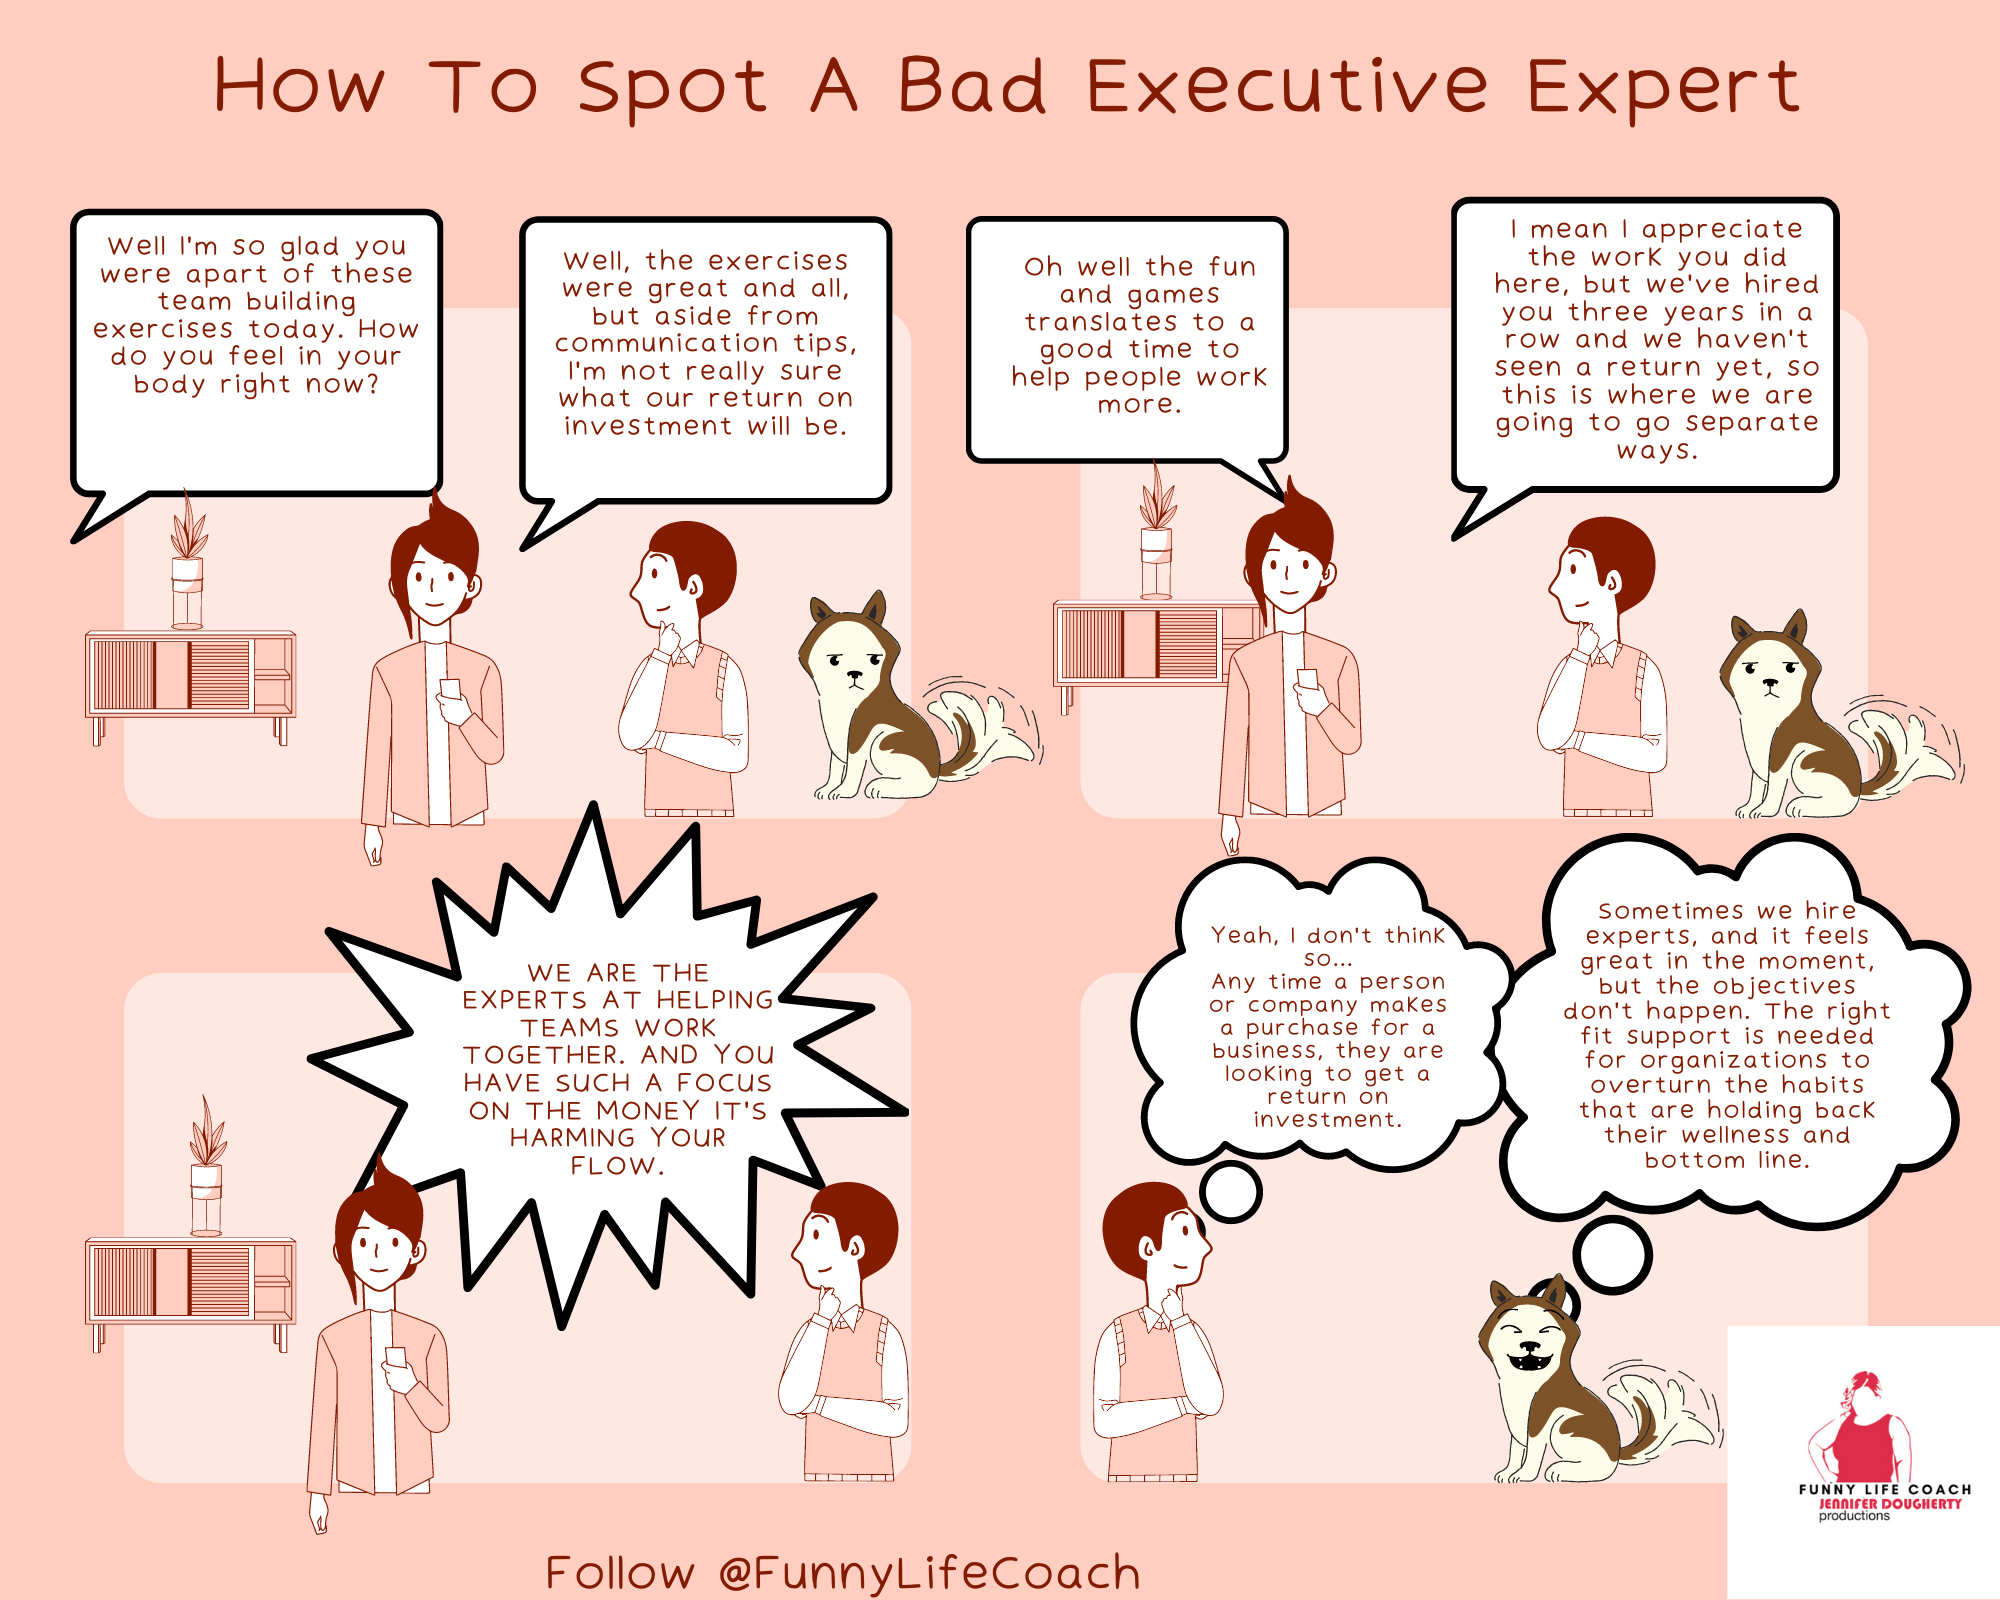 Corporate Bad Advice Memes — Funny Life Coach Productions